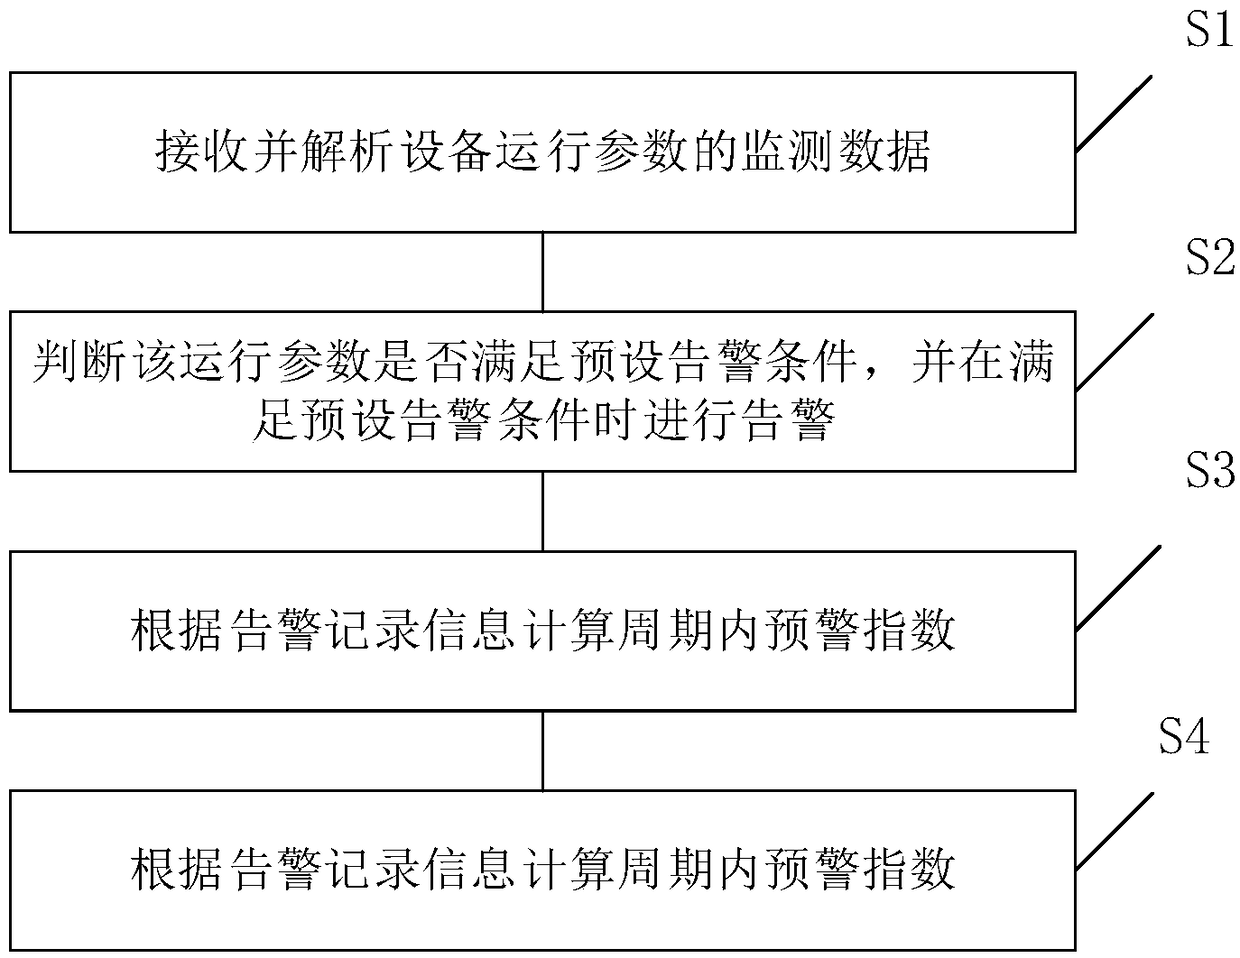 Equipment operation quality real-time monitoring method